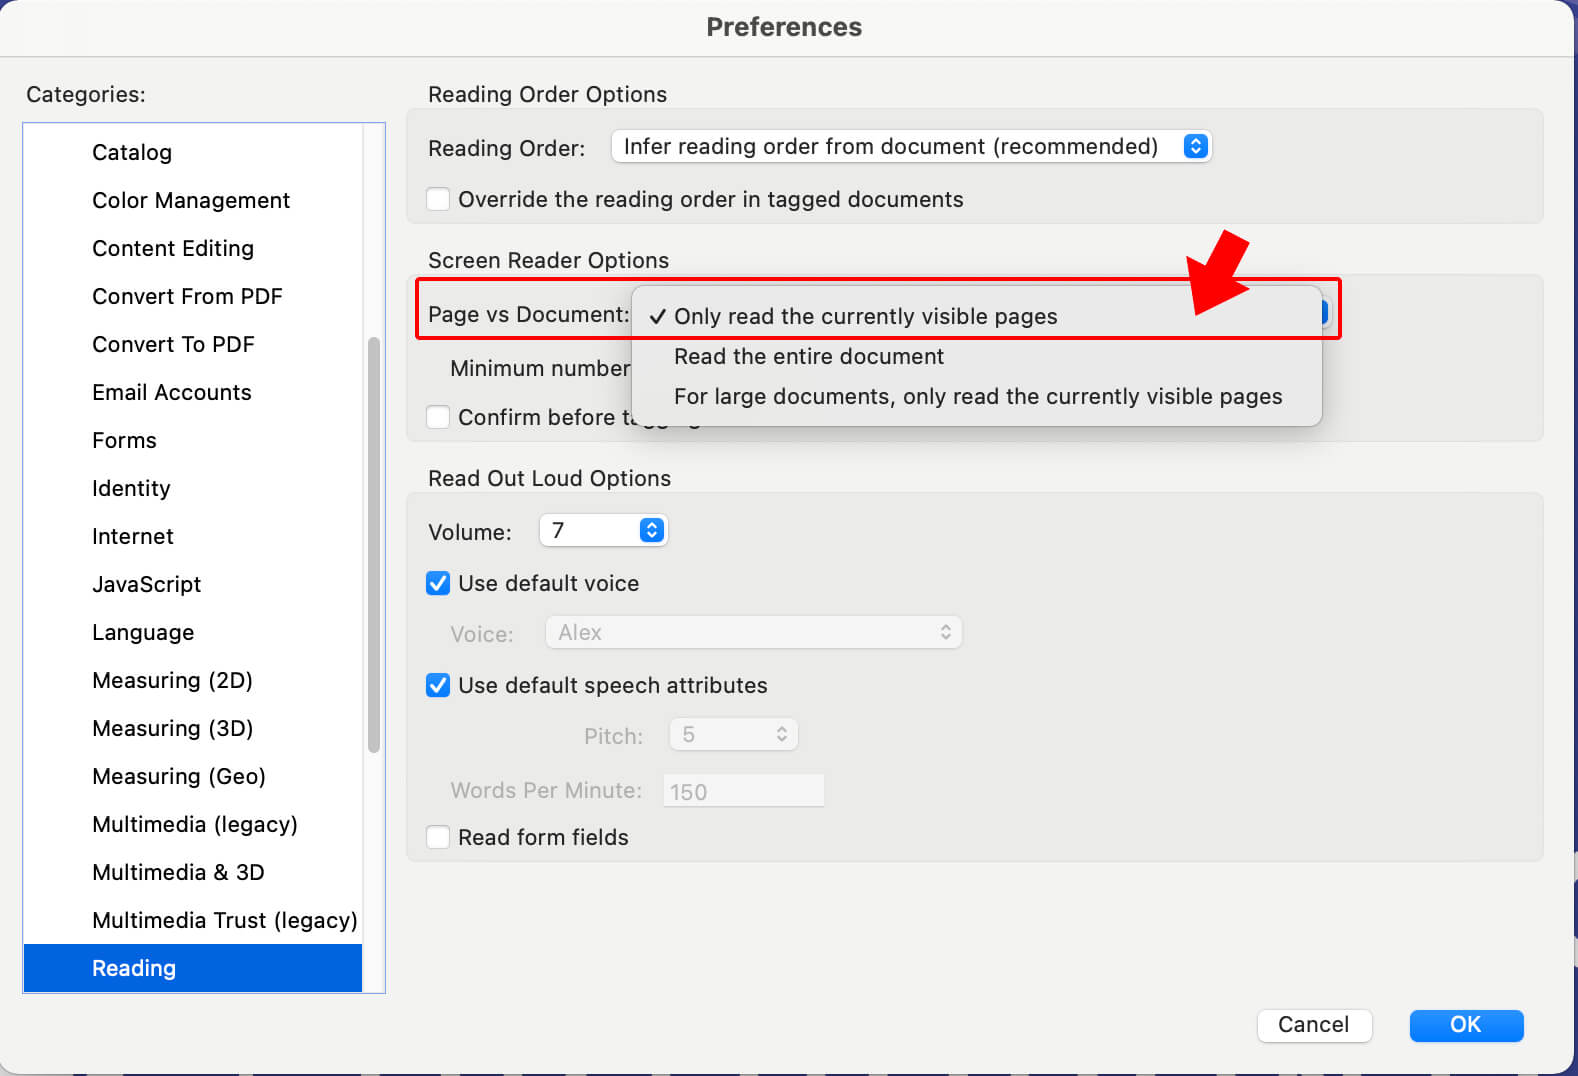 Change Adobe Acrobat's Reading Preferences to "Only read the current visible page."